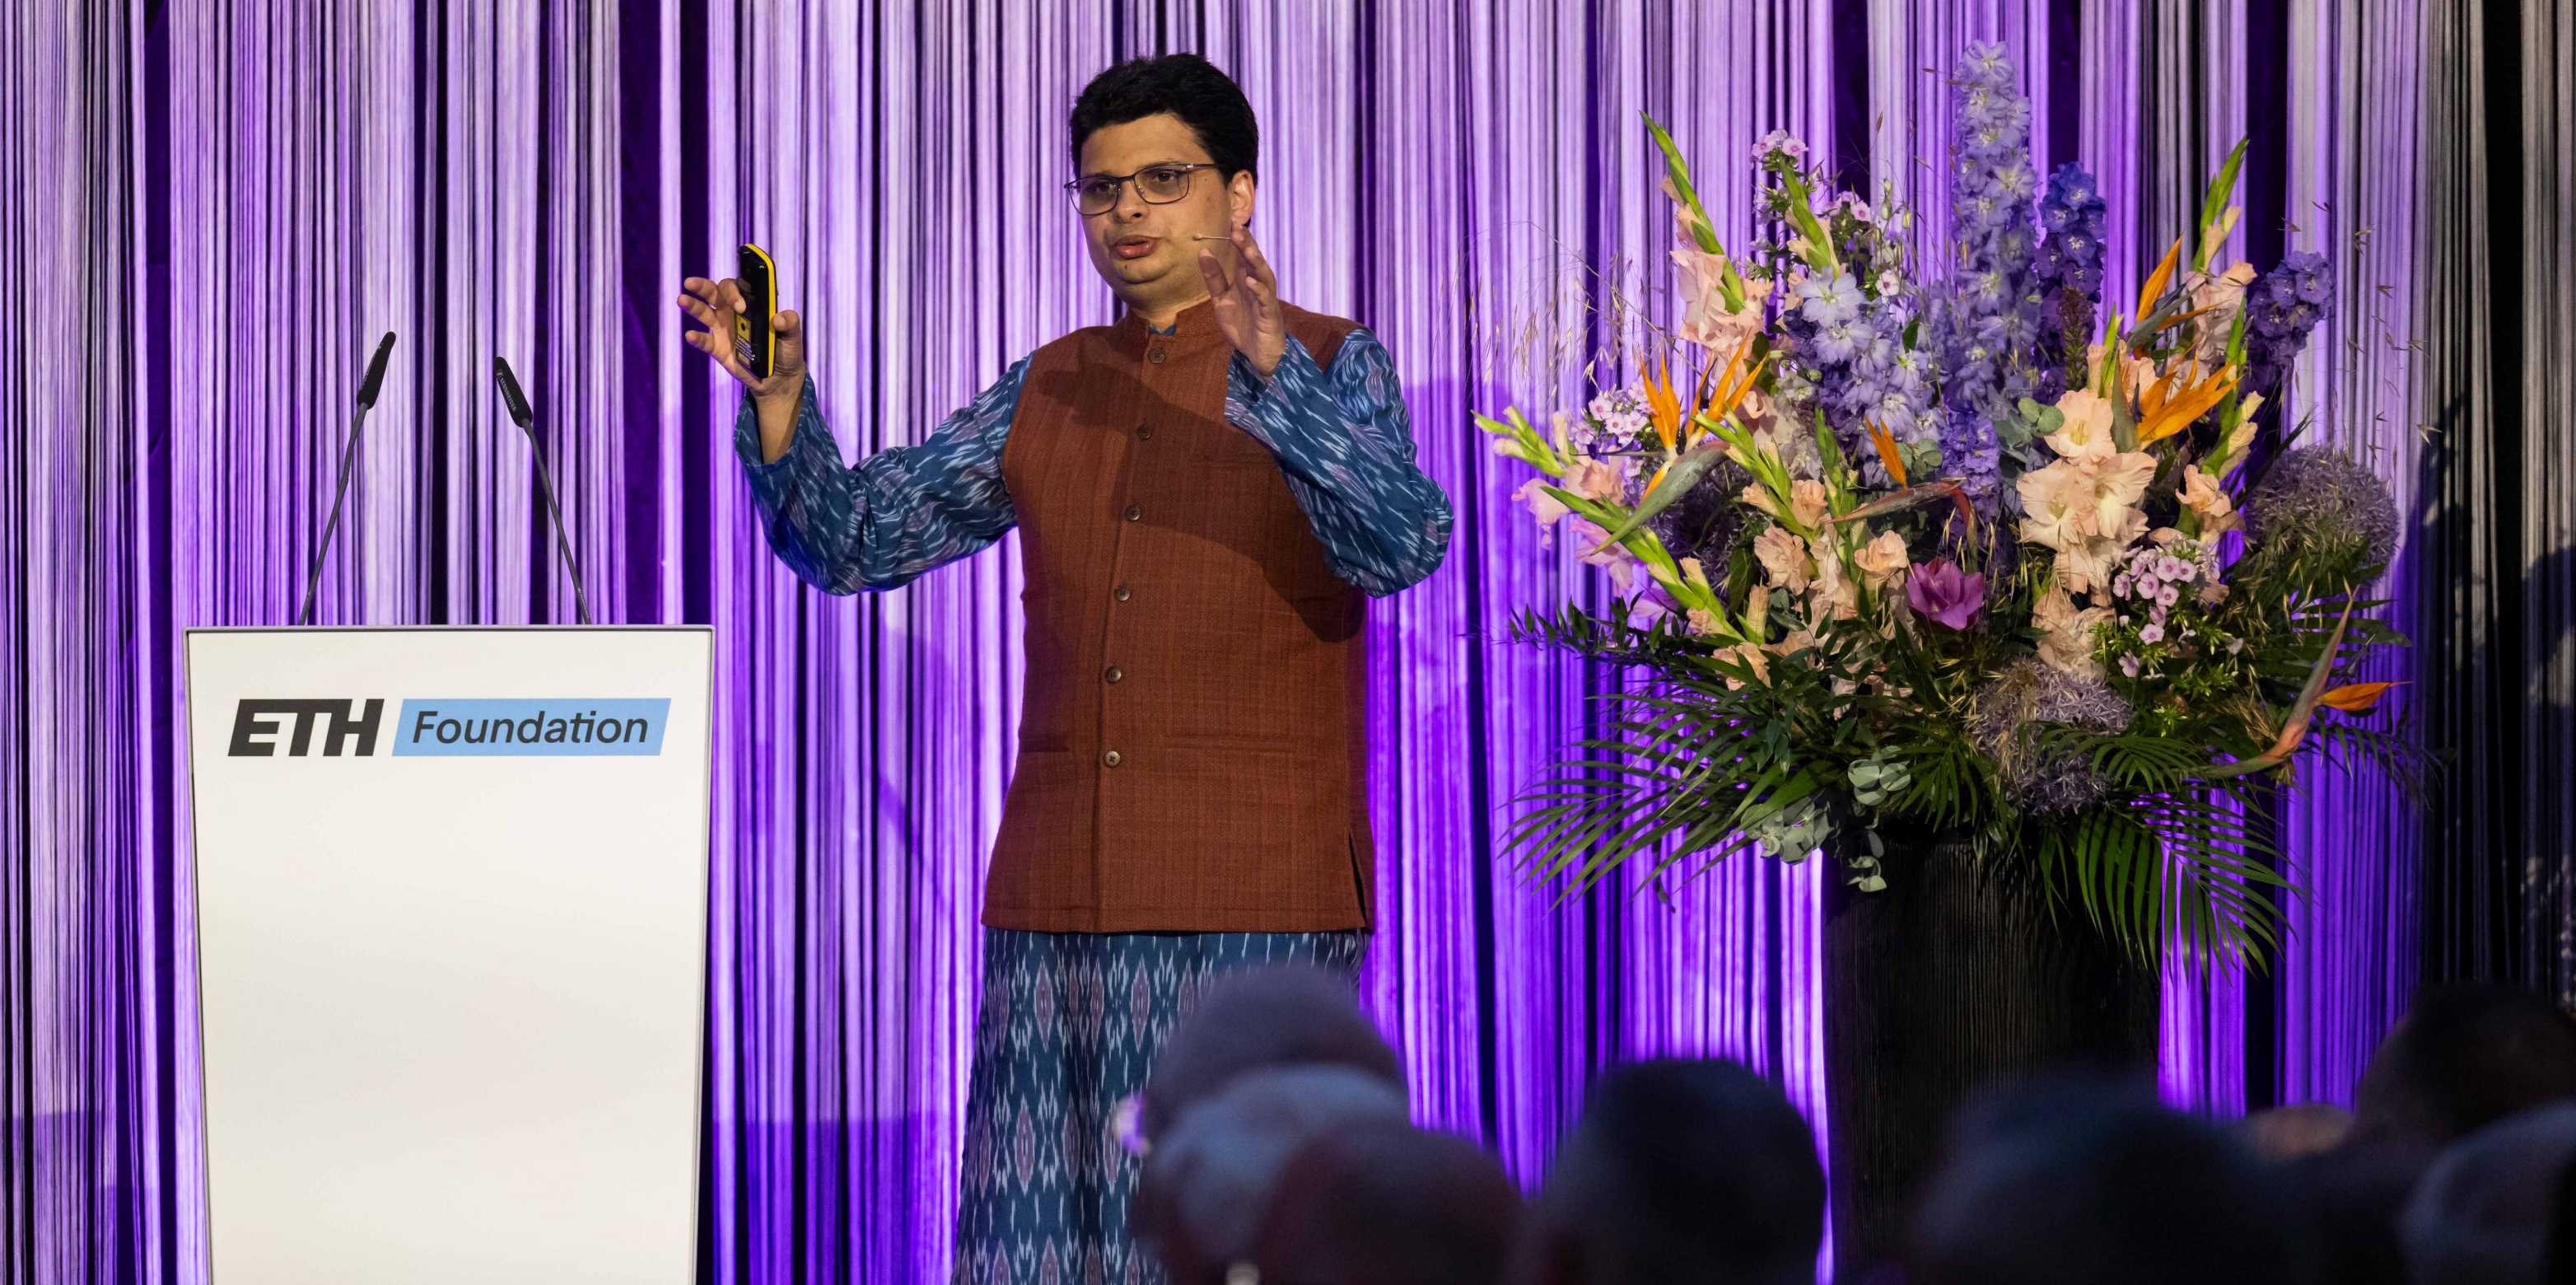 Siddhartha Mishra stands next to a lectern at the ETH Foundation and recites something.